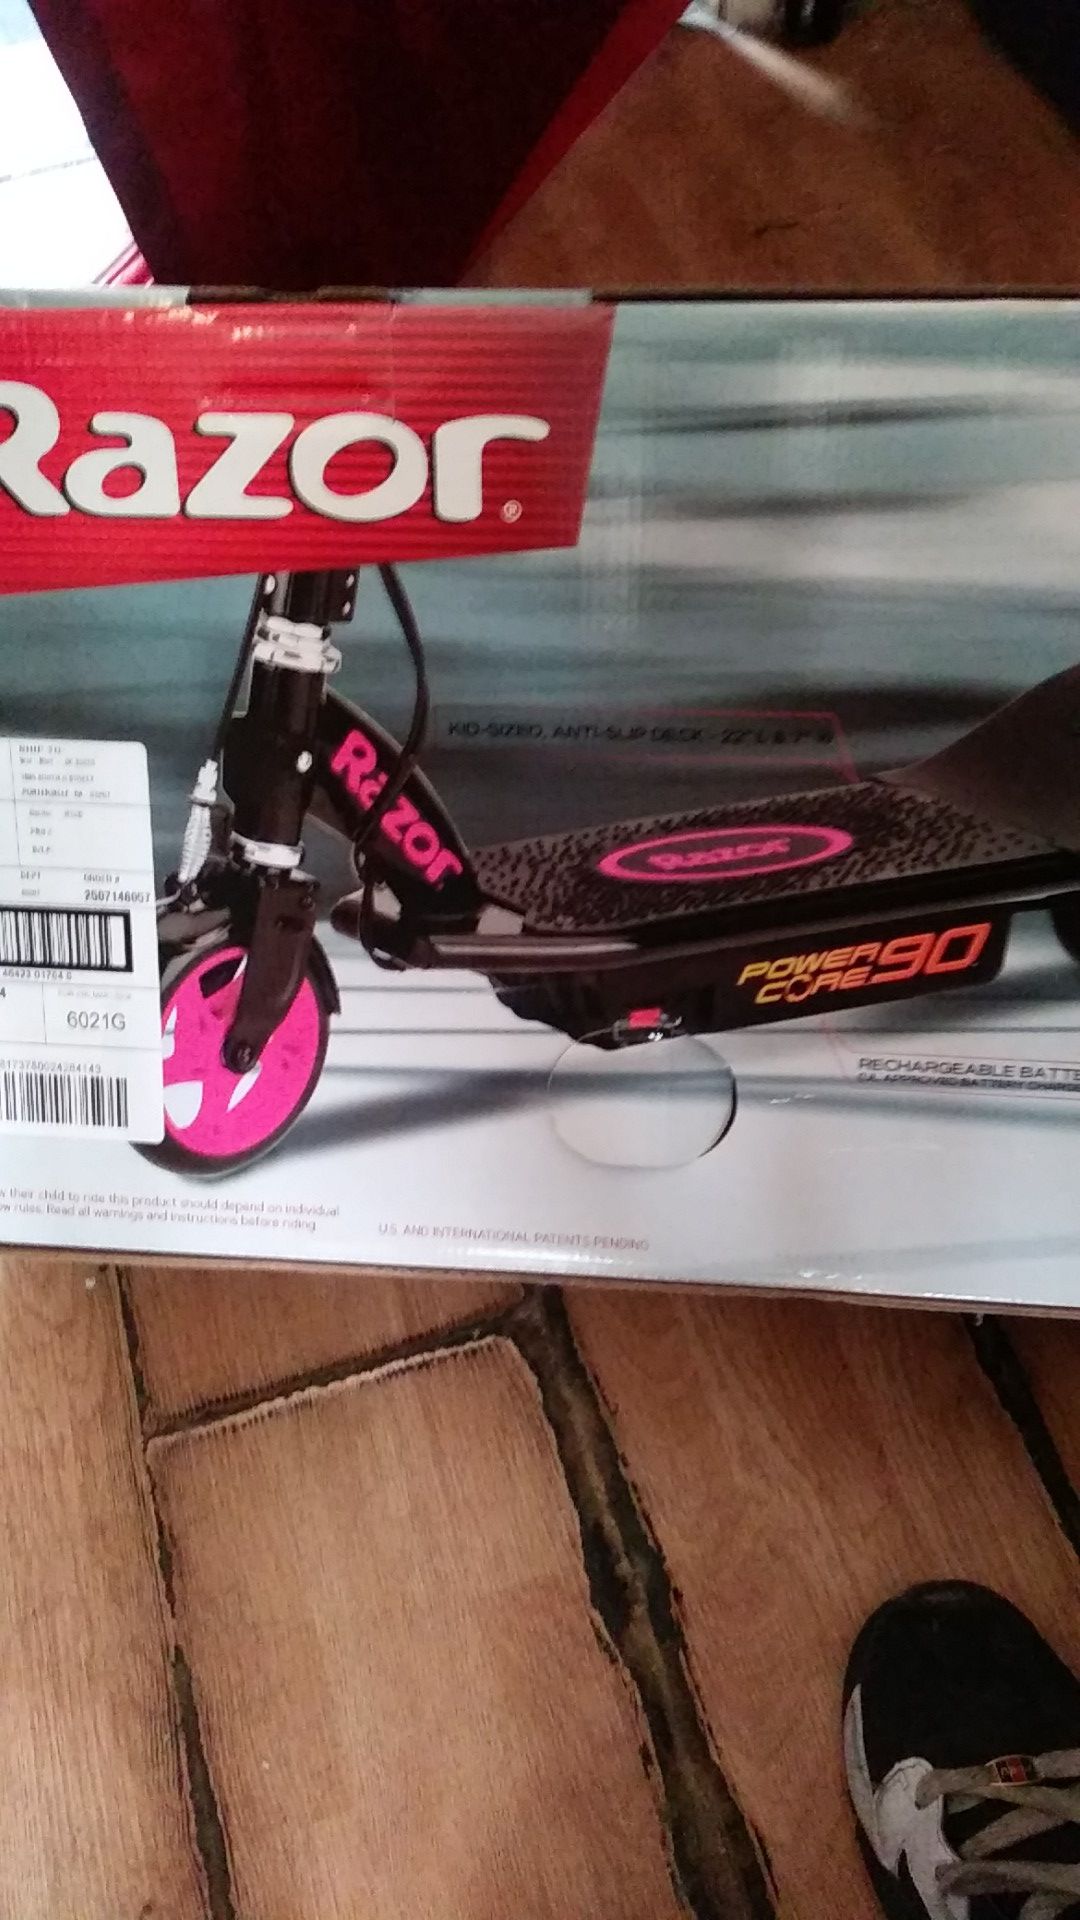 Brand New in the Box Razor POWER CORE 90 ELECTRIC HUB MOTOR SCOOTER